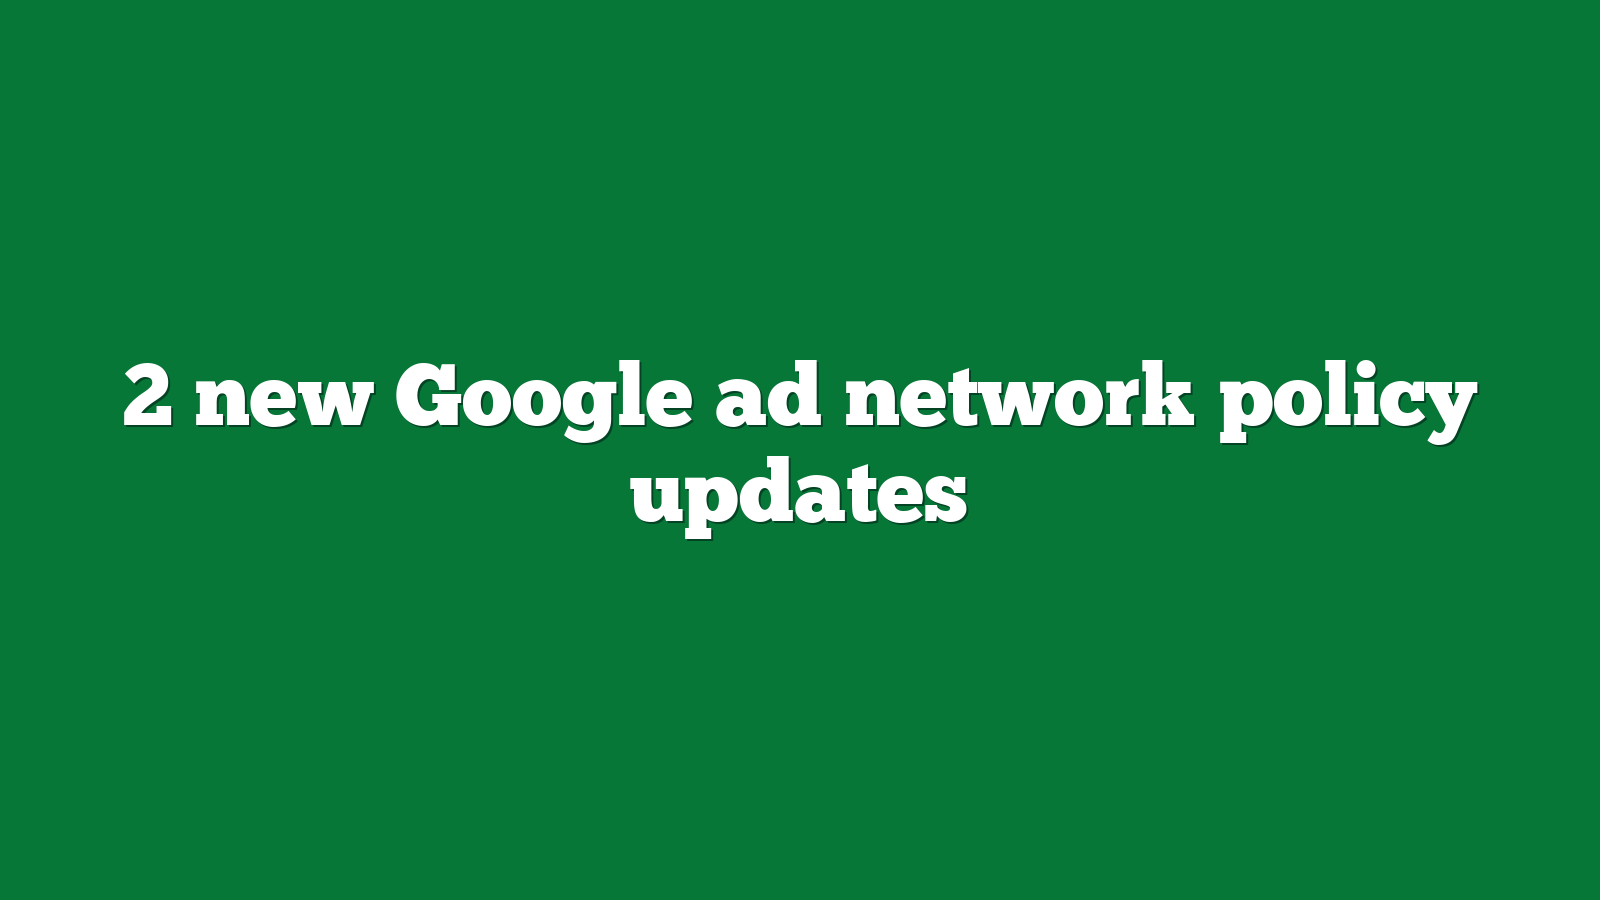 2 new Google ad network policy updates